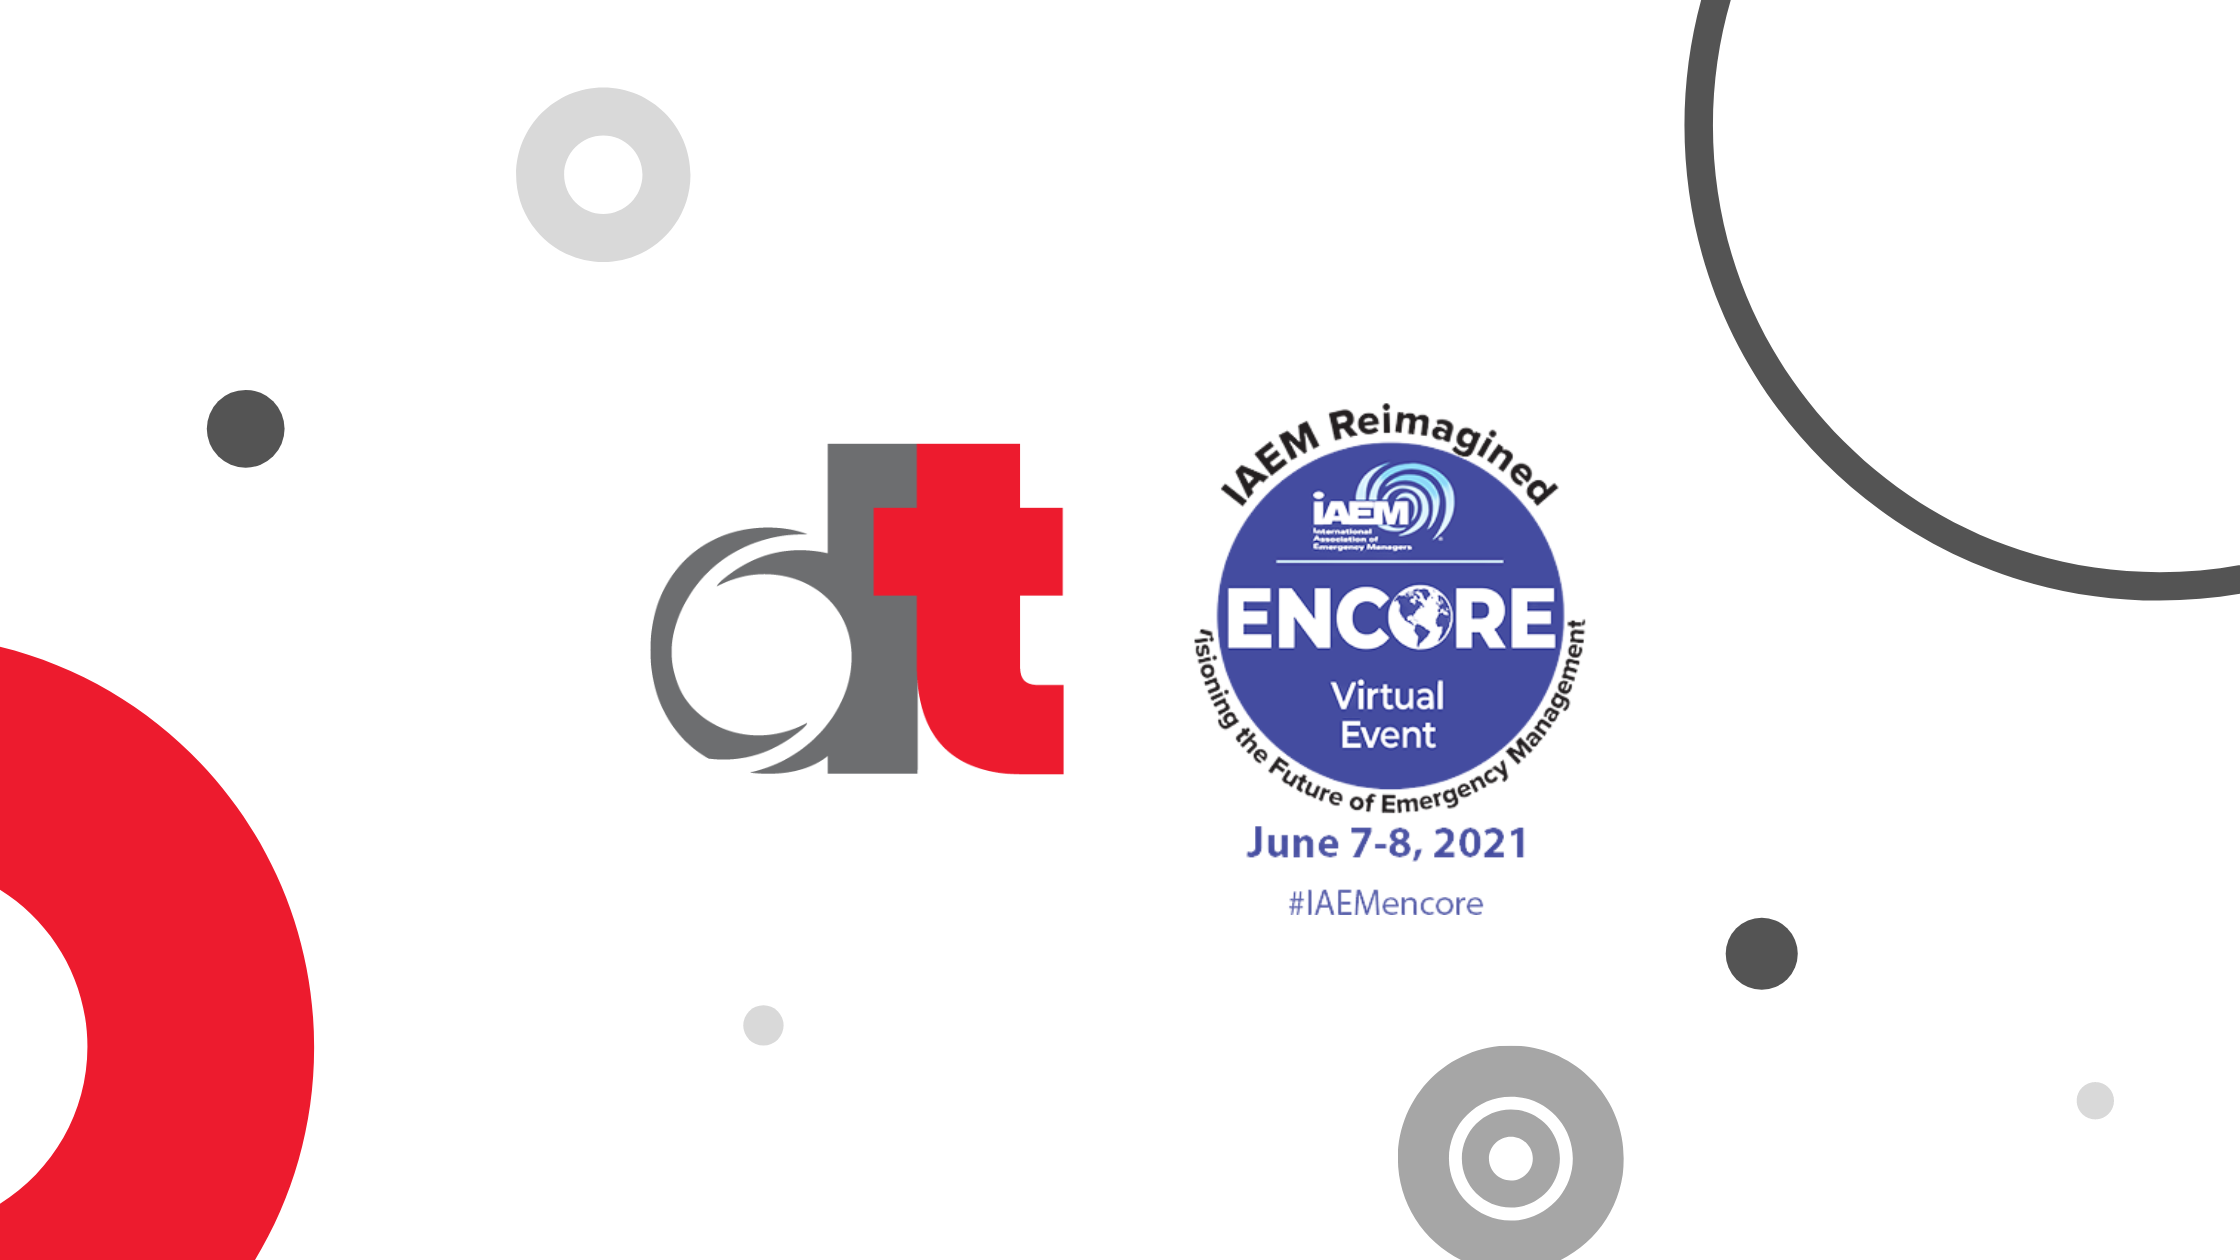 Join Us for the Virtual IAEM Encore 2021 Conference